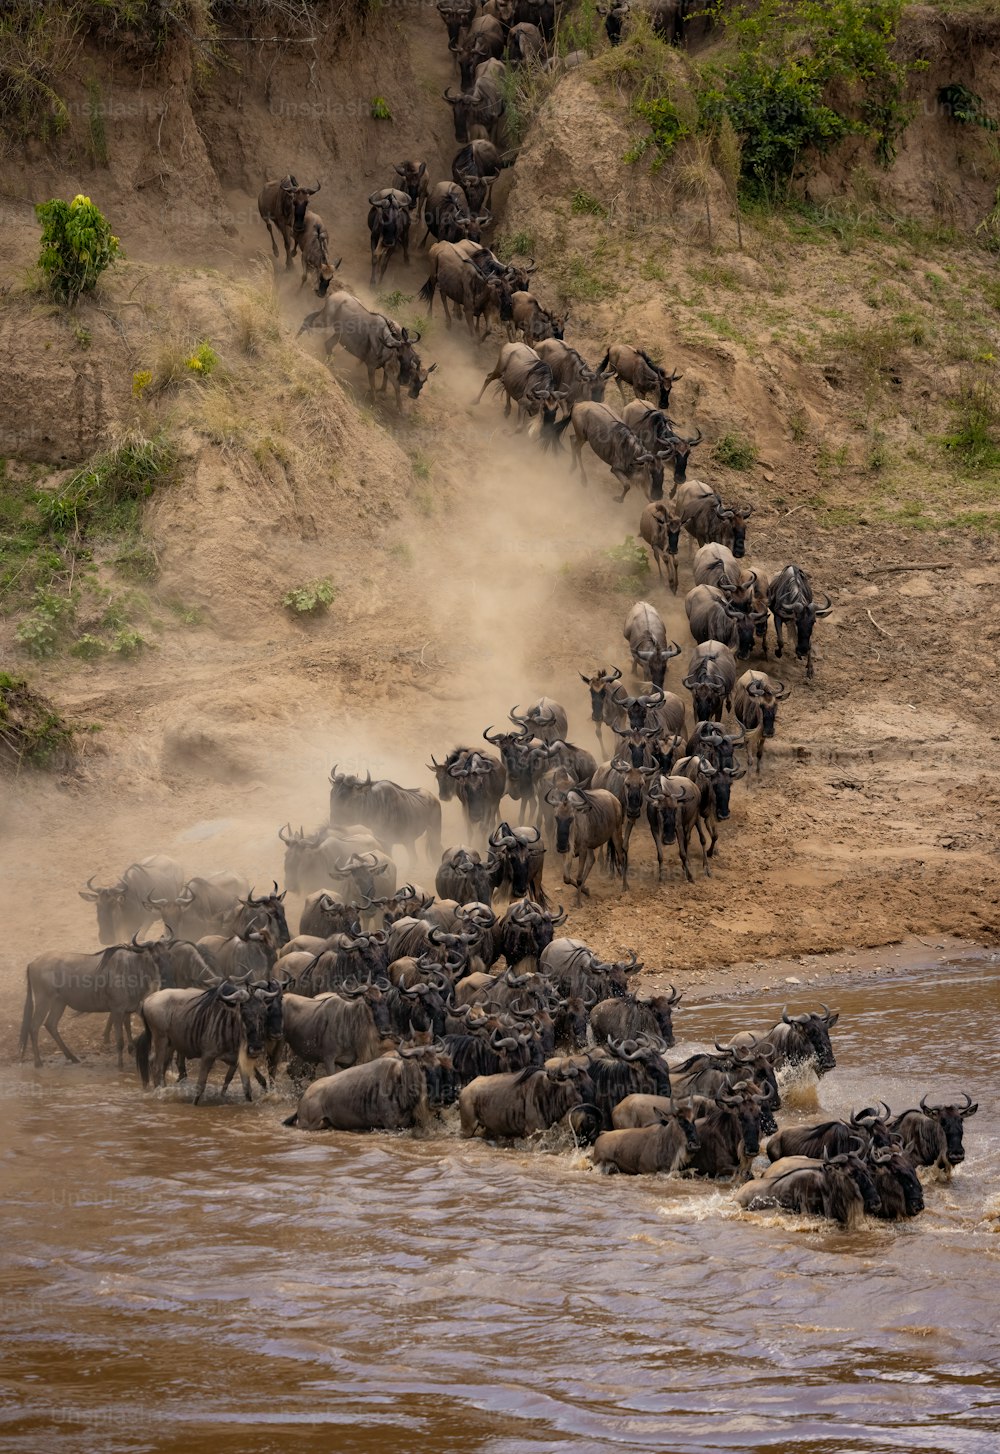 A photo of the wildebeest migration in Africa photo – Animal Image on  Unsplash